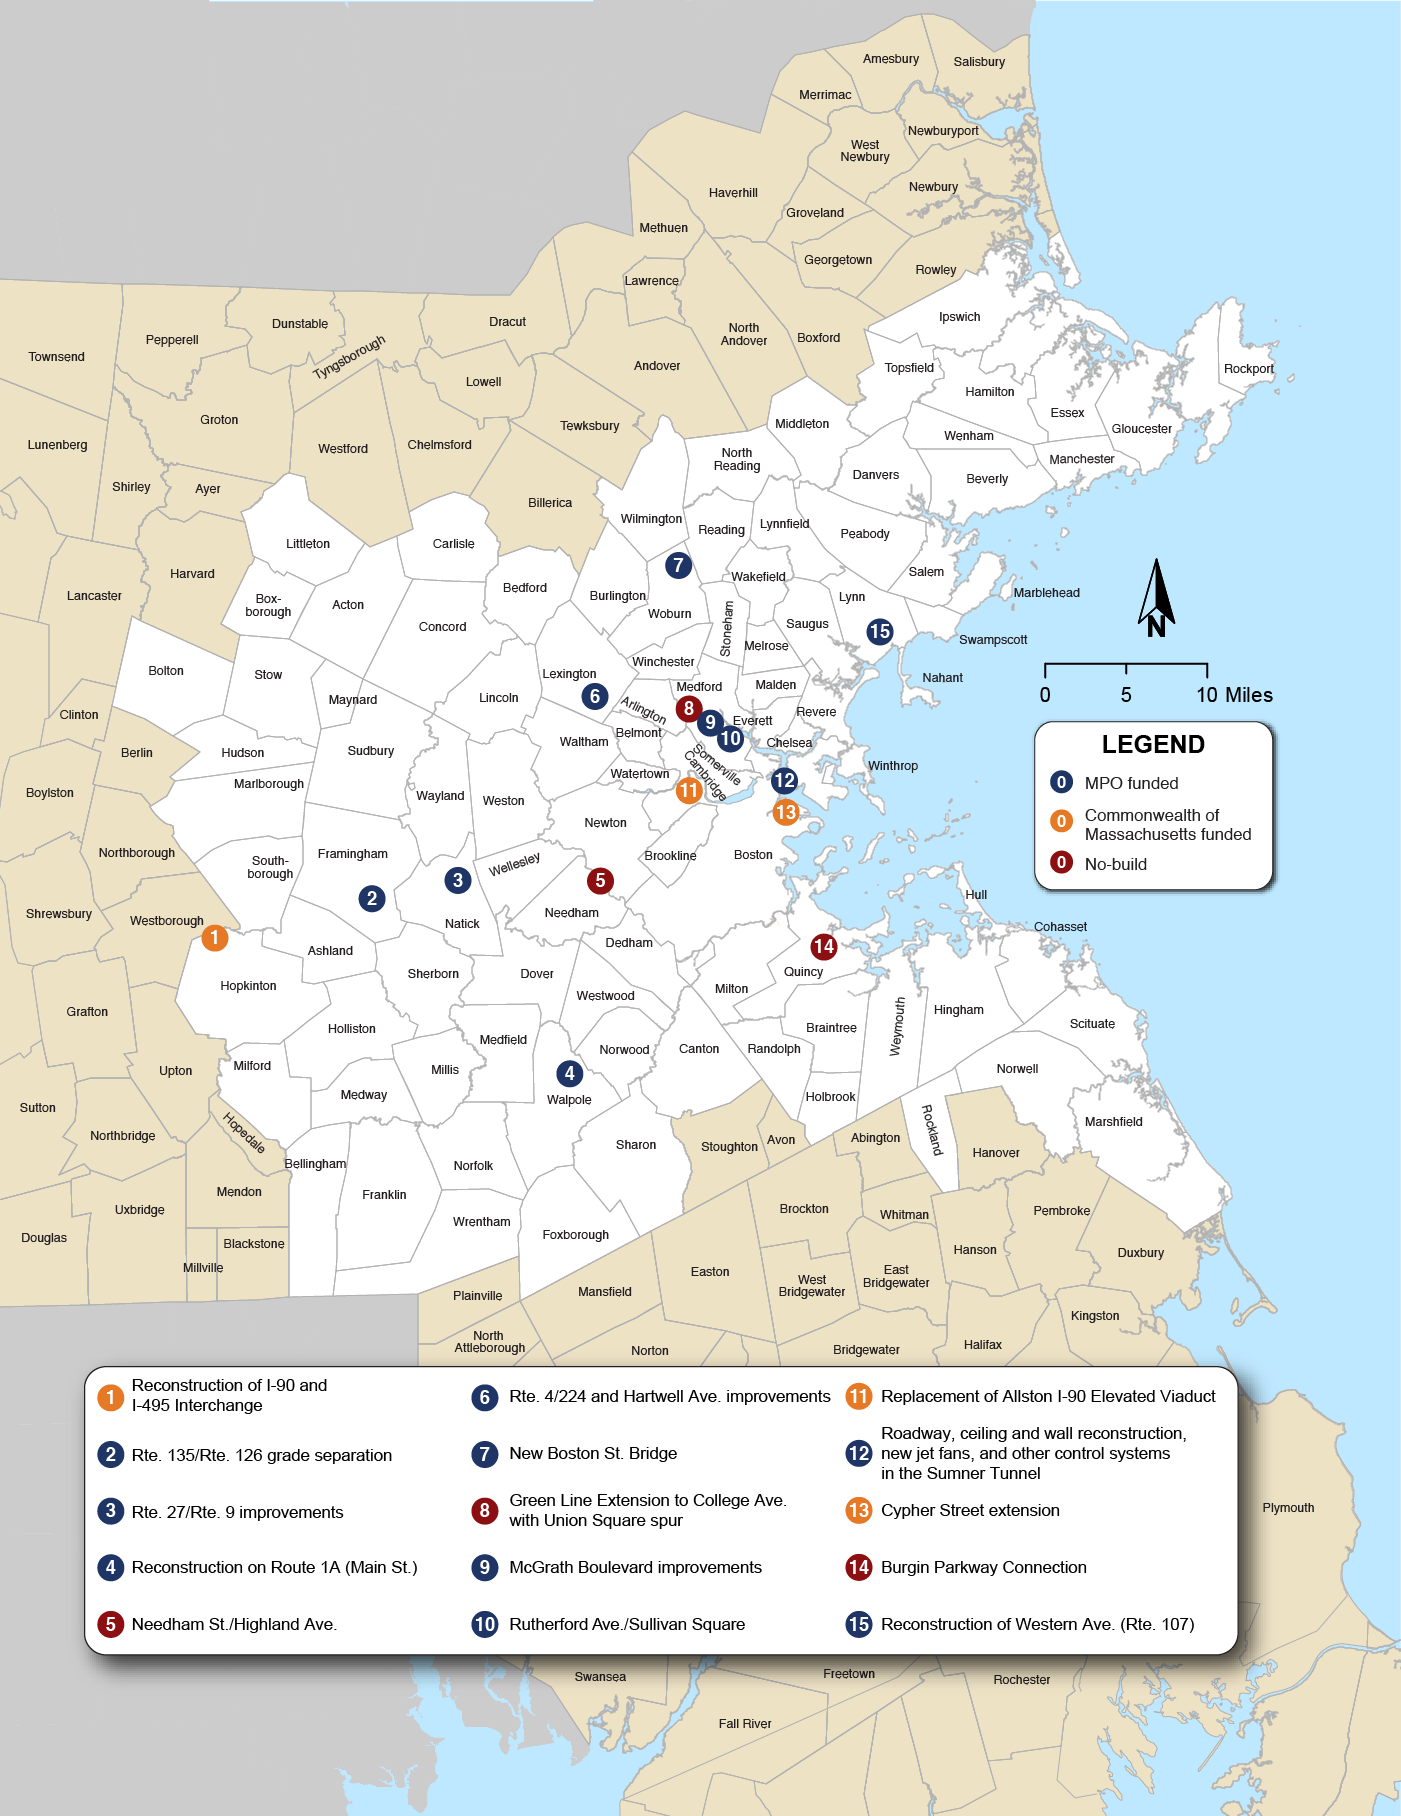 Figure 4-1. Major Infrastructure Projects in the Recommended Plan
Figure 4-1 is a map of the Boston Region that shows the location and name of 15 major infrastructure projects. Figure 4-1 also shows whether the project is MPO funded, Commonwealth of Massachusetts funded, or a No-build project. 
